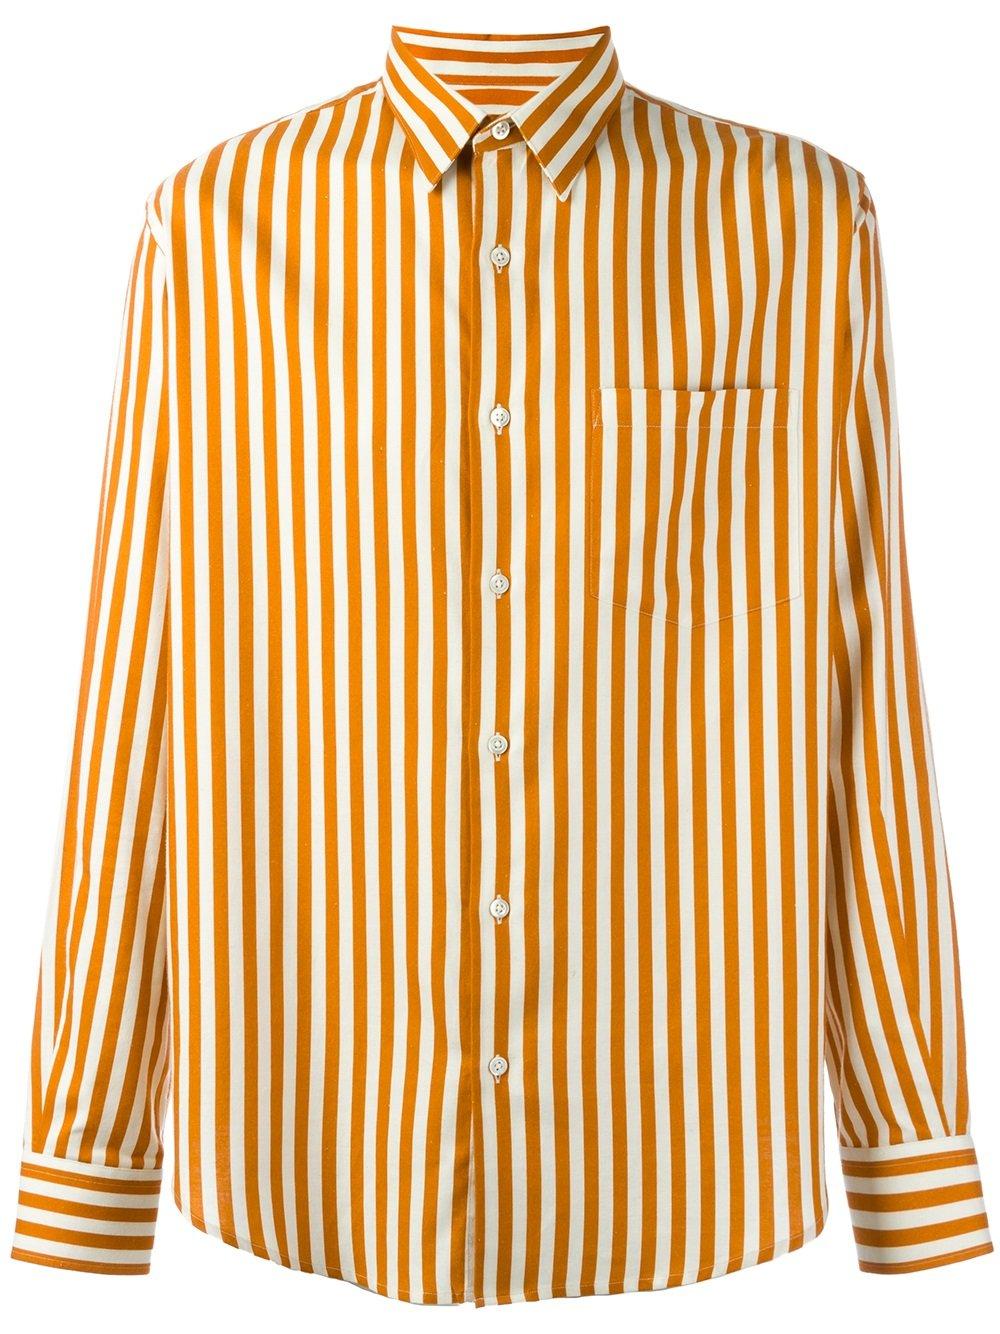 Lyst - Ami Large Classic Shirt in Orange for Men